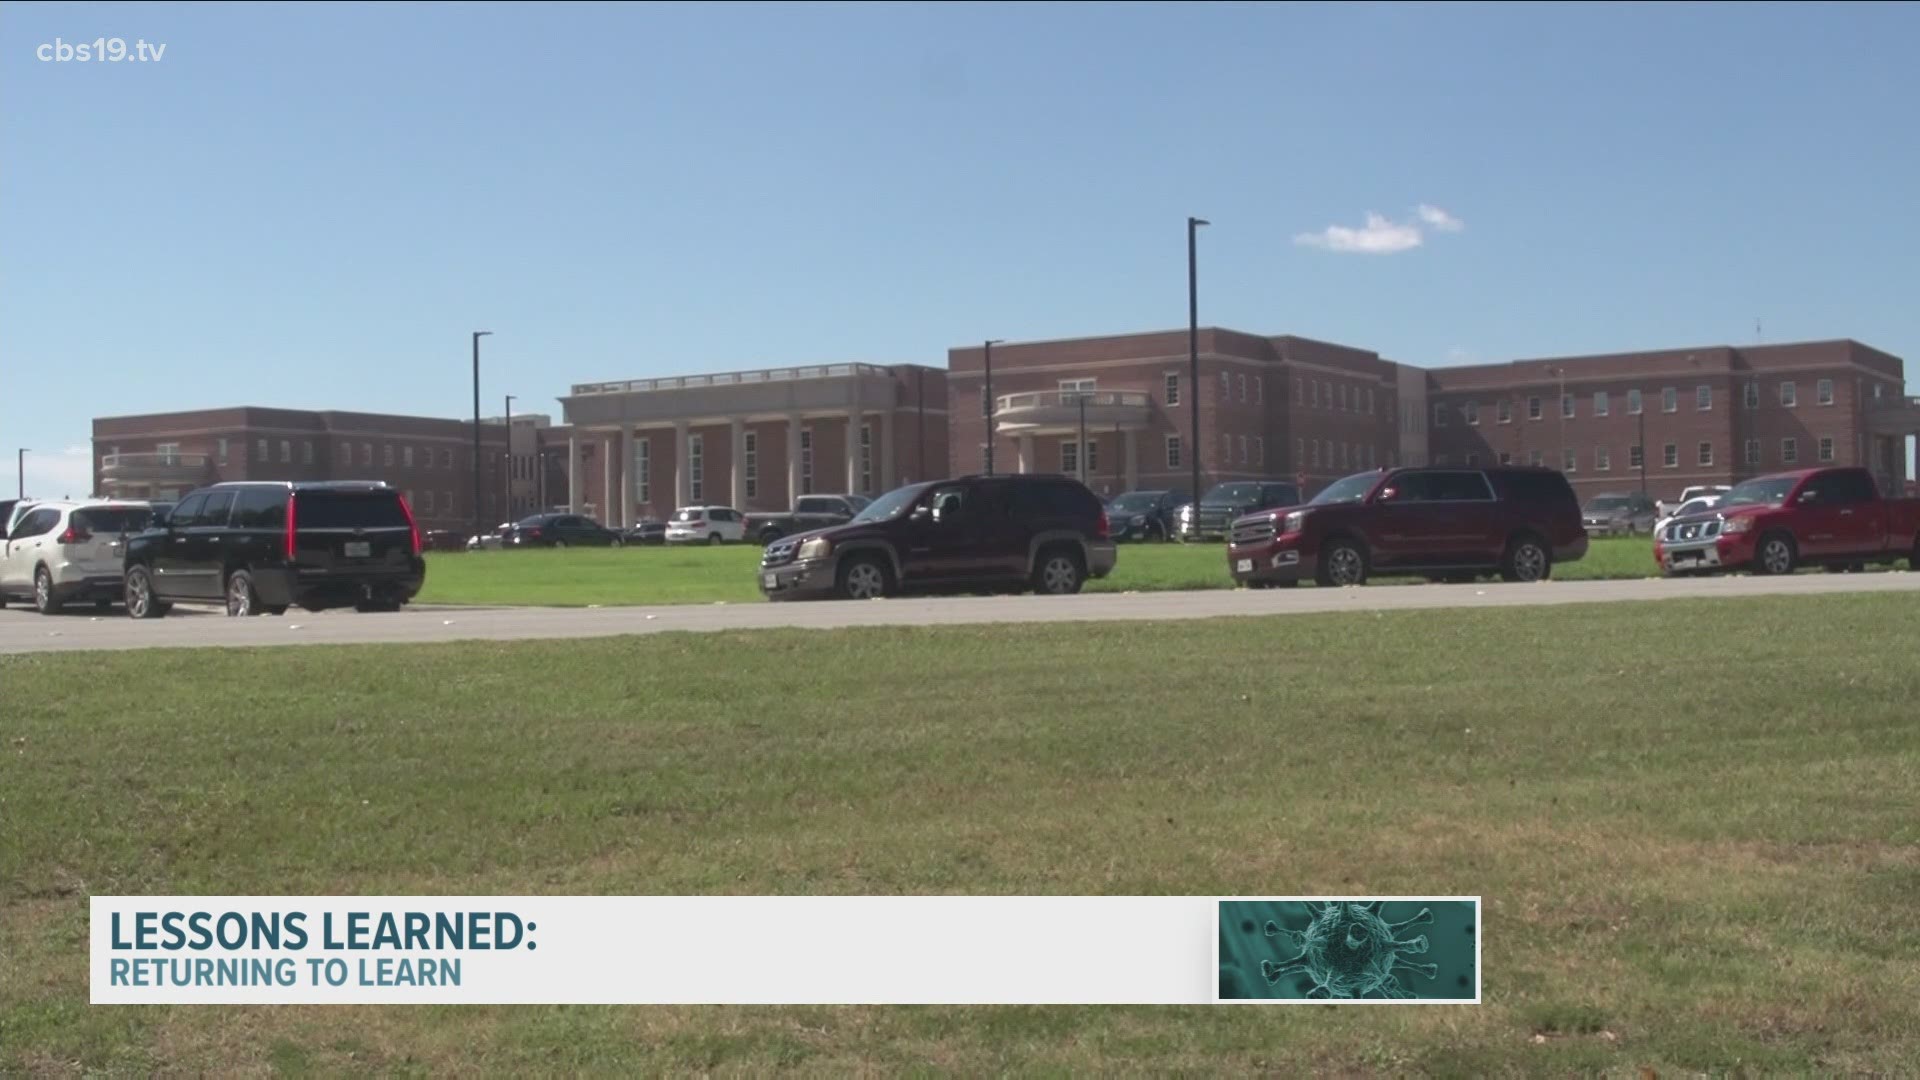 Both Tyler ISD and Alba-Golden ISD weigh in on why they're requesting students back on campus and their concerns run deep after reviewing student progress.